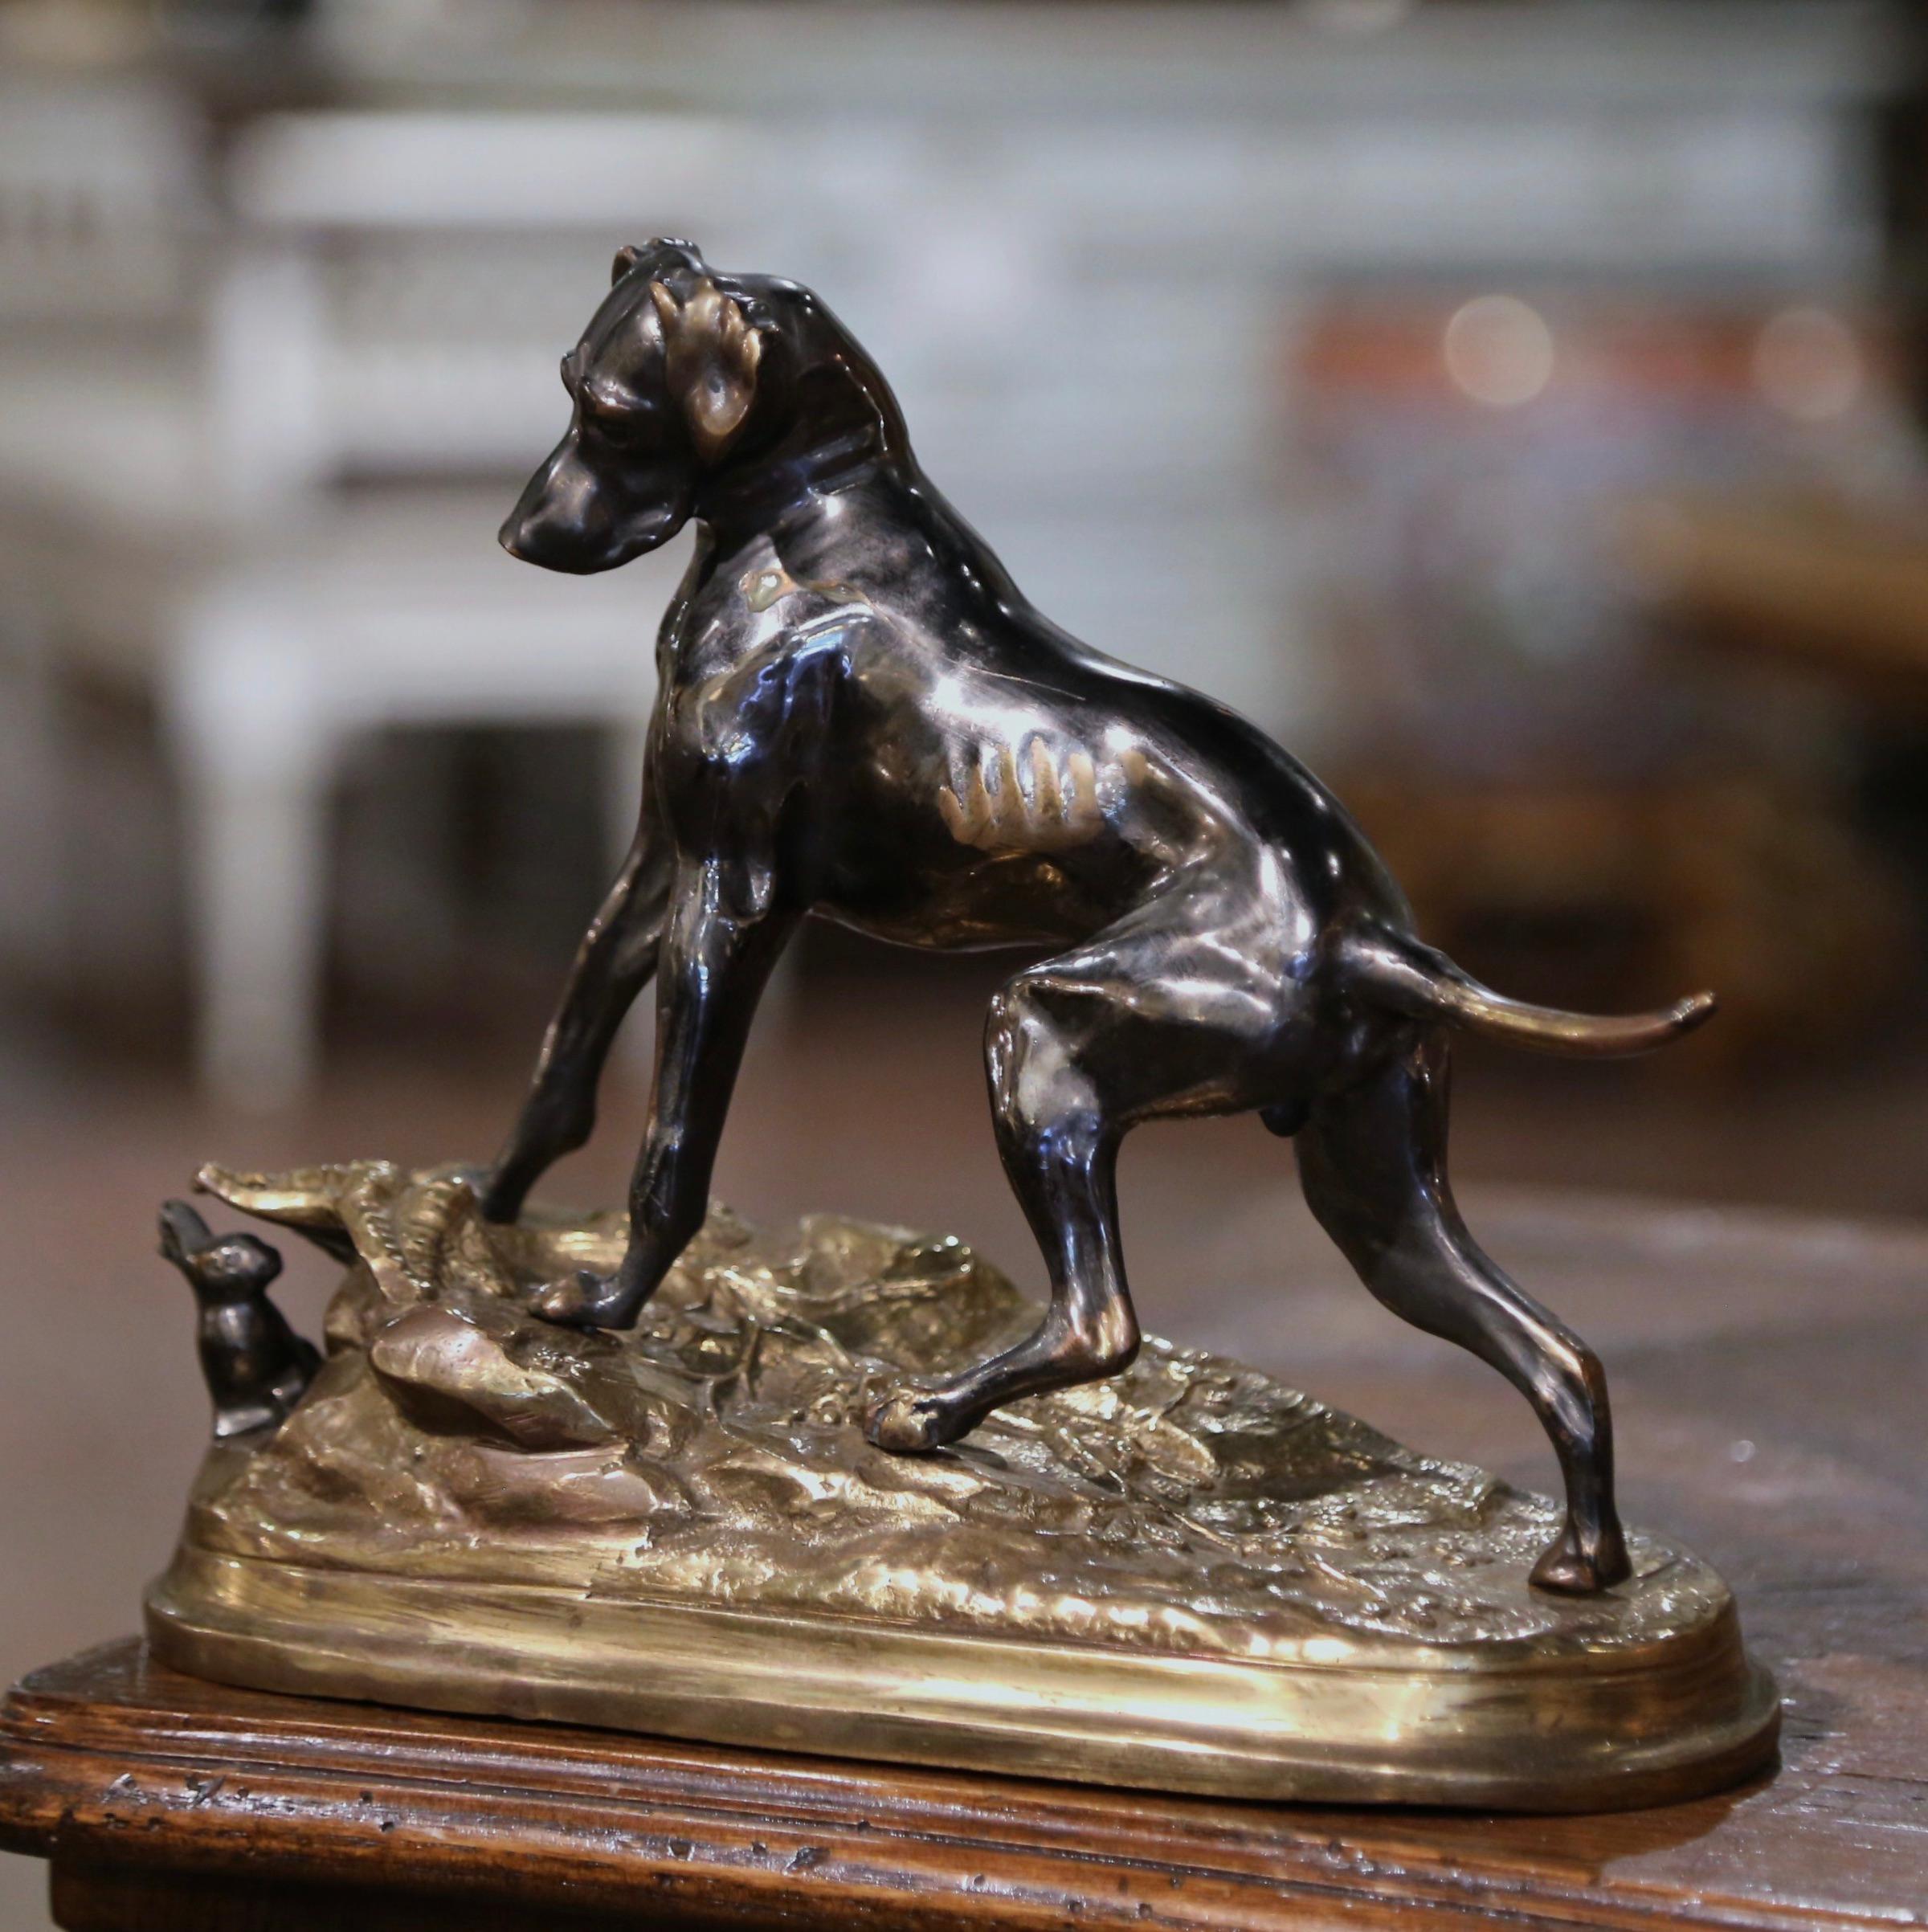 This antique bronze sculpture was created in France, circa 1880. Standing on a bronze dore base, the composition features a patinated bronze Labrador dog standing on rocky ground and playing with a small rabbit hidden behind foliage. The elegant art